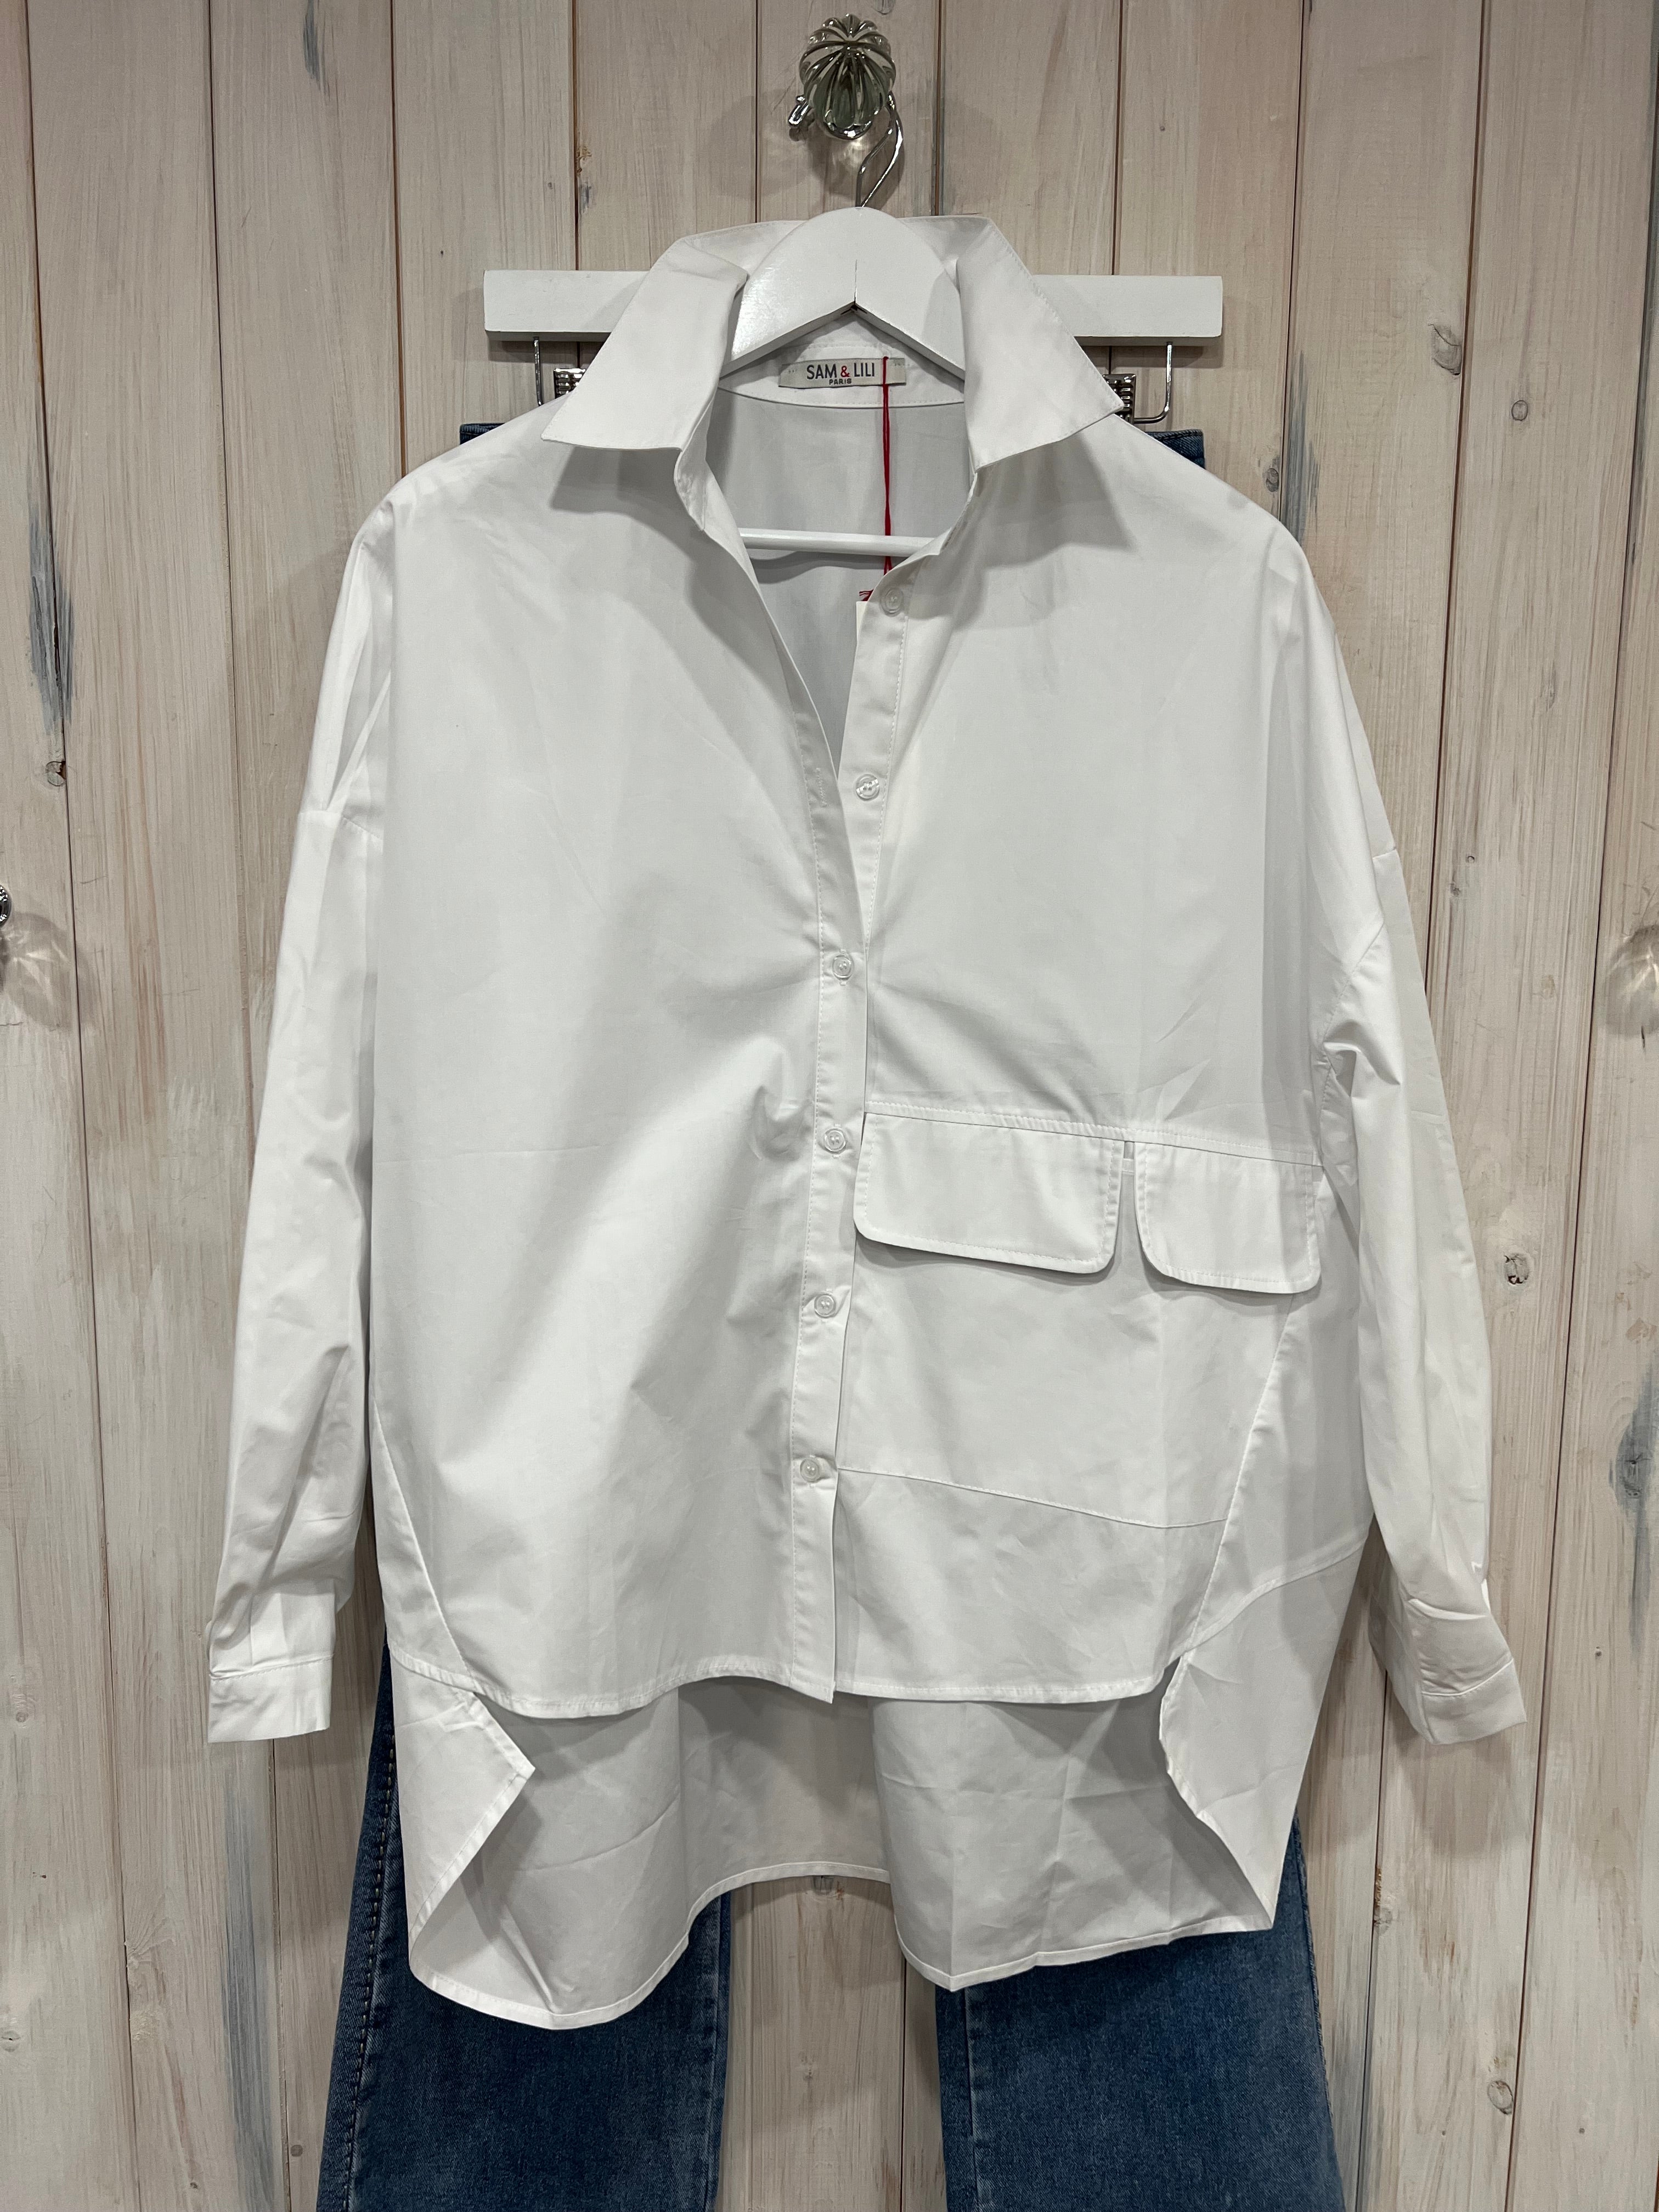 Bodine Cocoon Shirt - 3 Colours - Sam & Lili New Collection